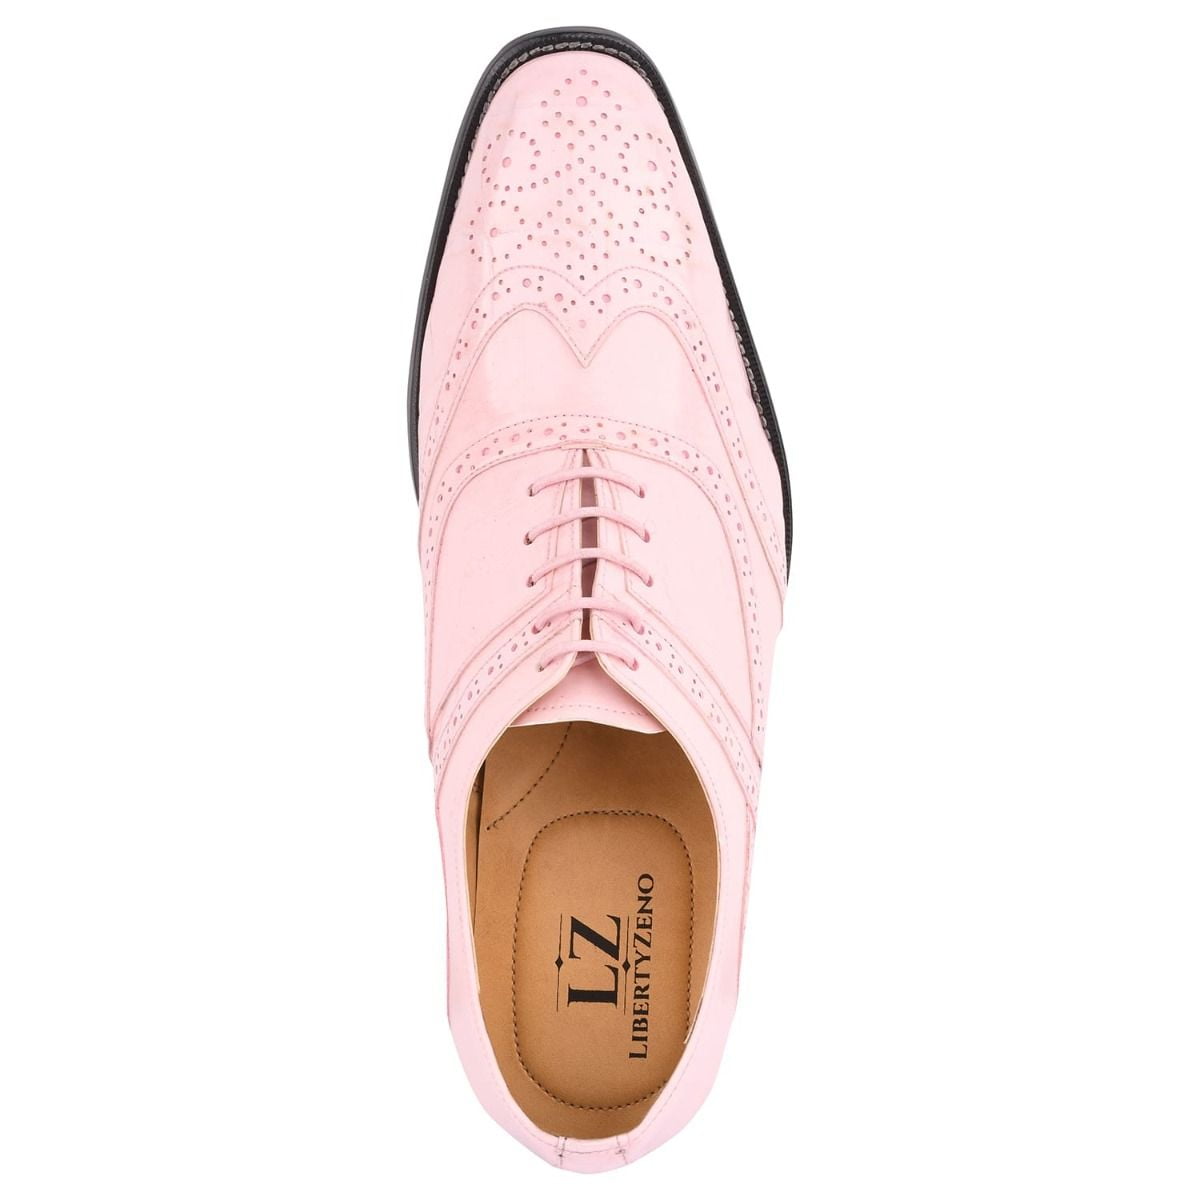 Handmade men's lace-up loafers in powder pink leather